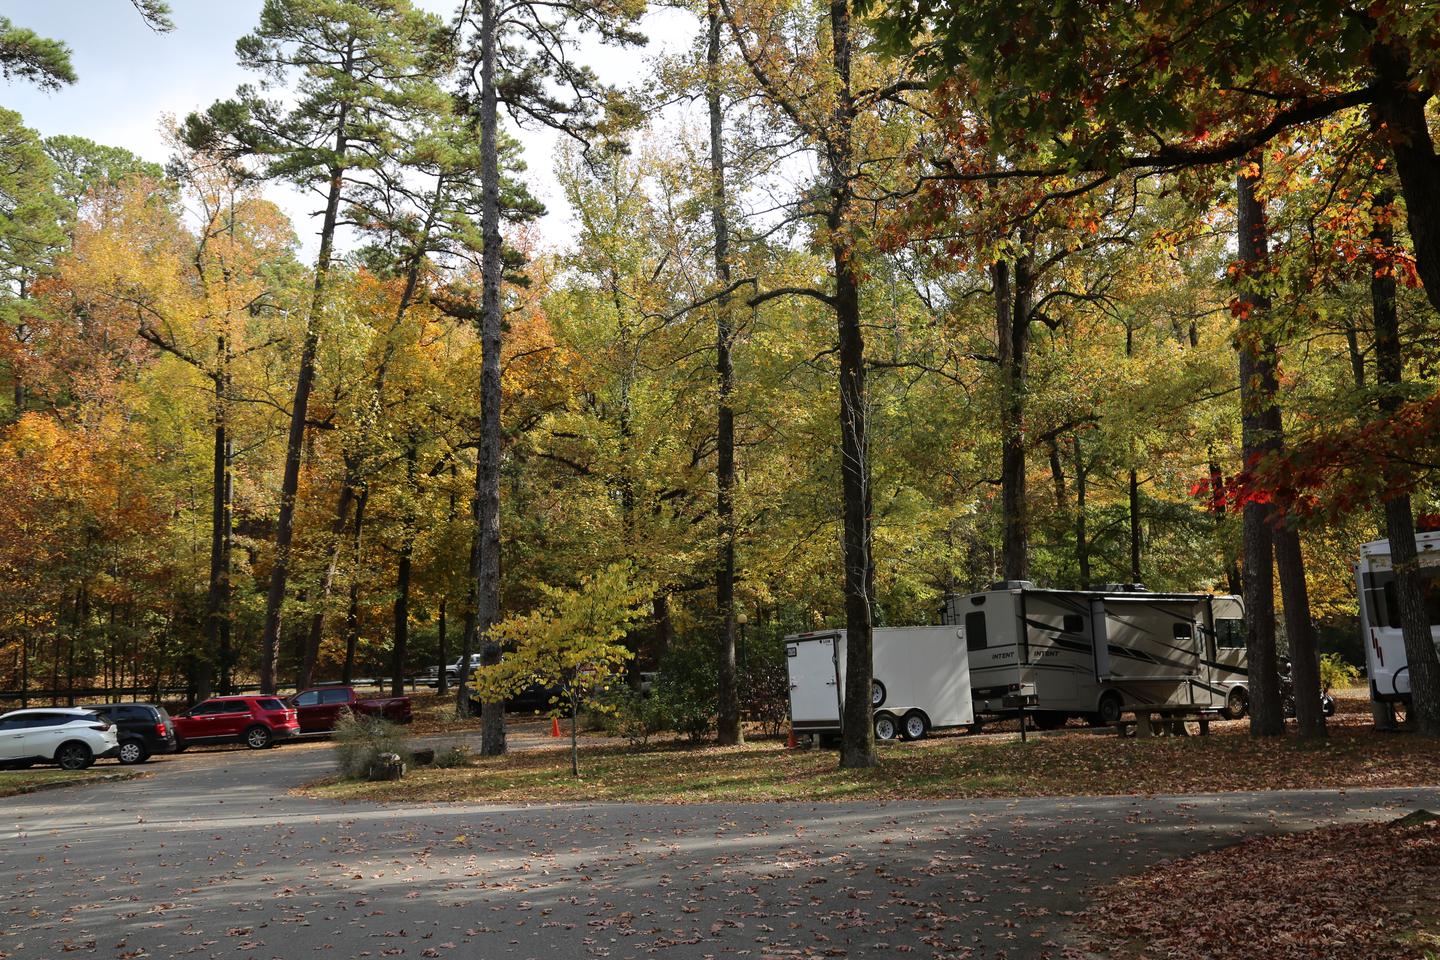 Gulpha Gorge Campsite with fall foliage and campersGulpha Gorge Campground in the fall